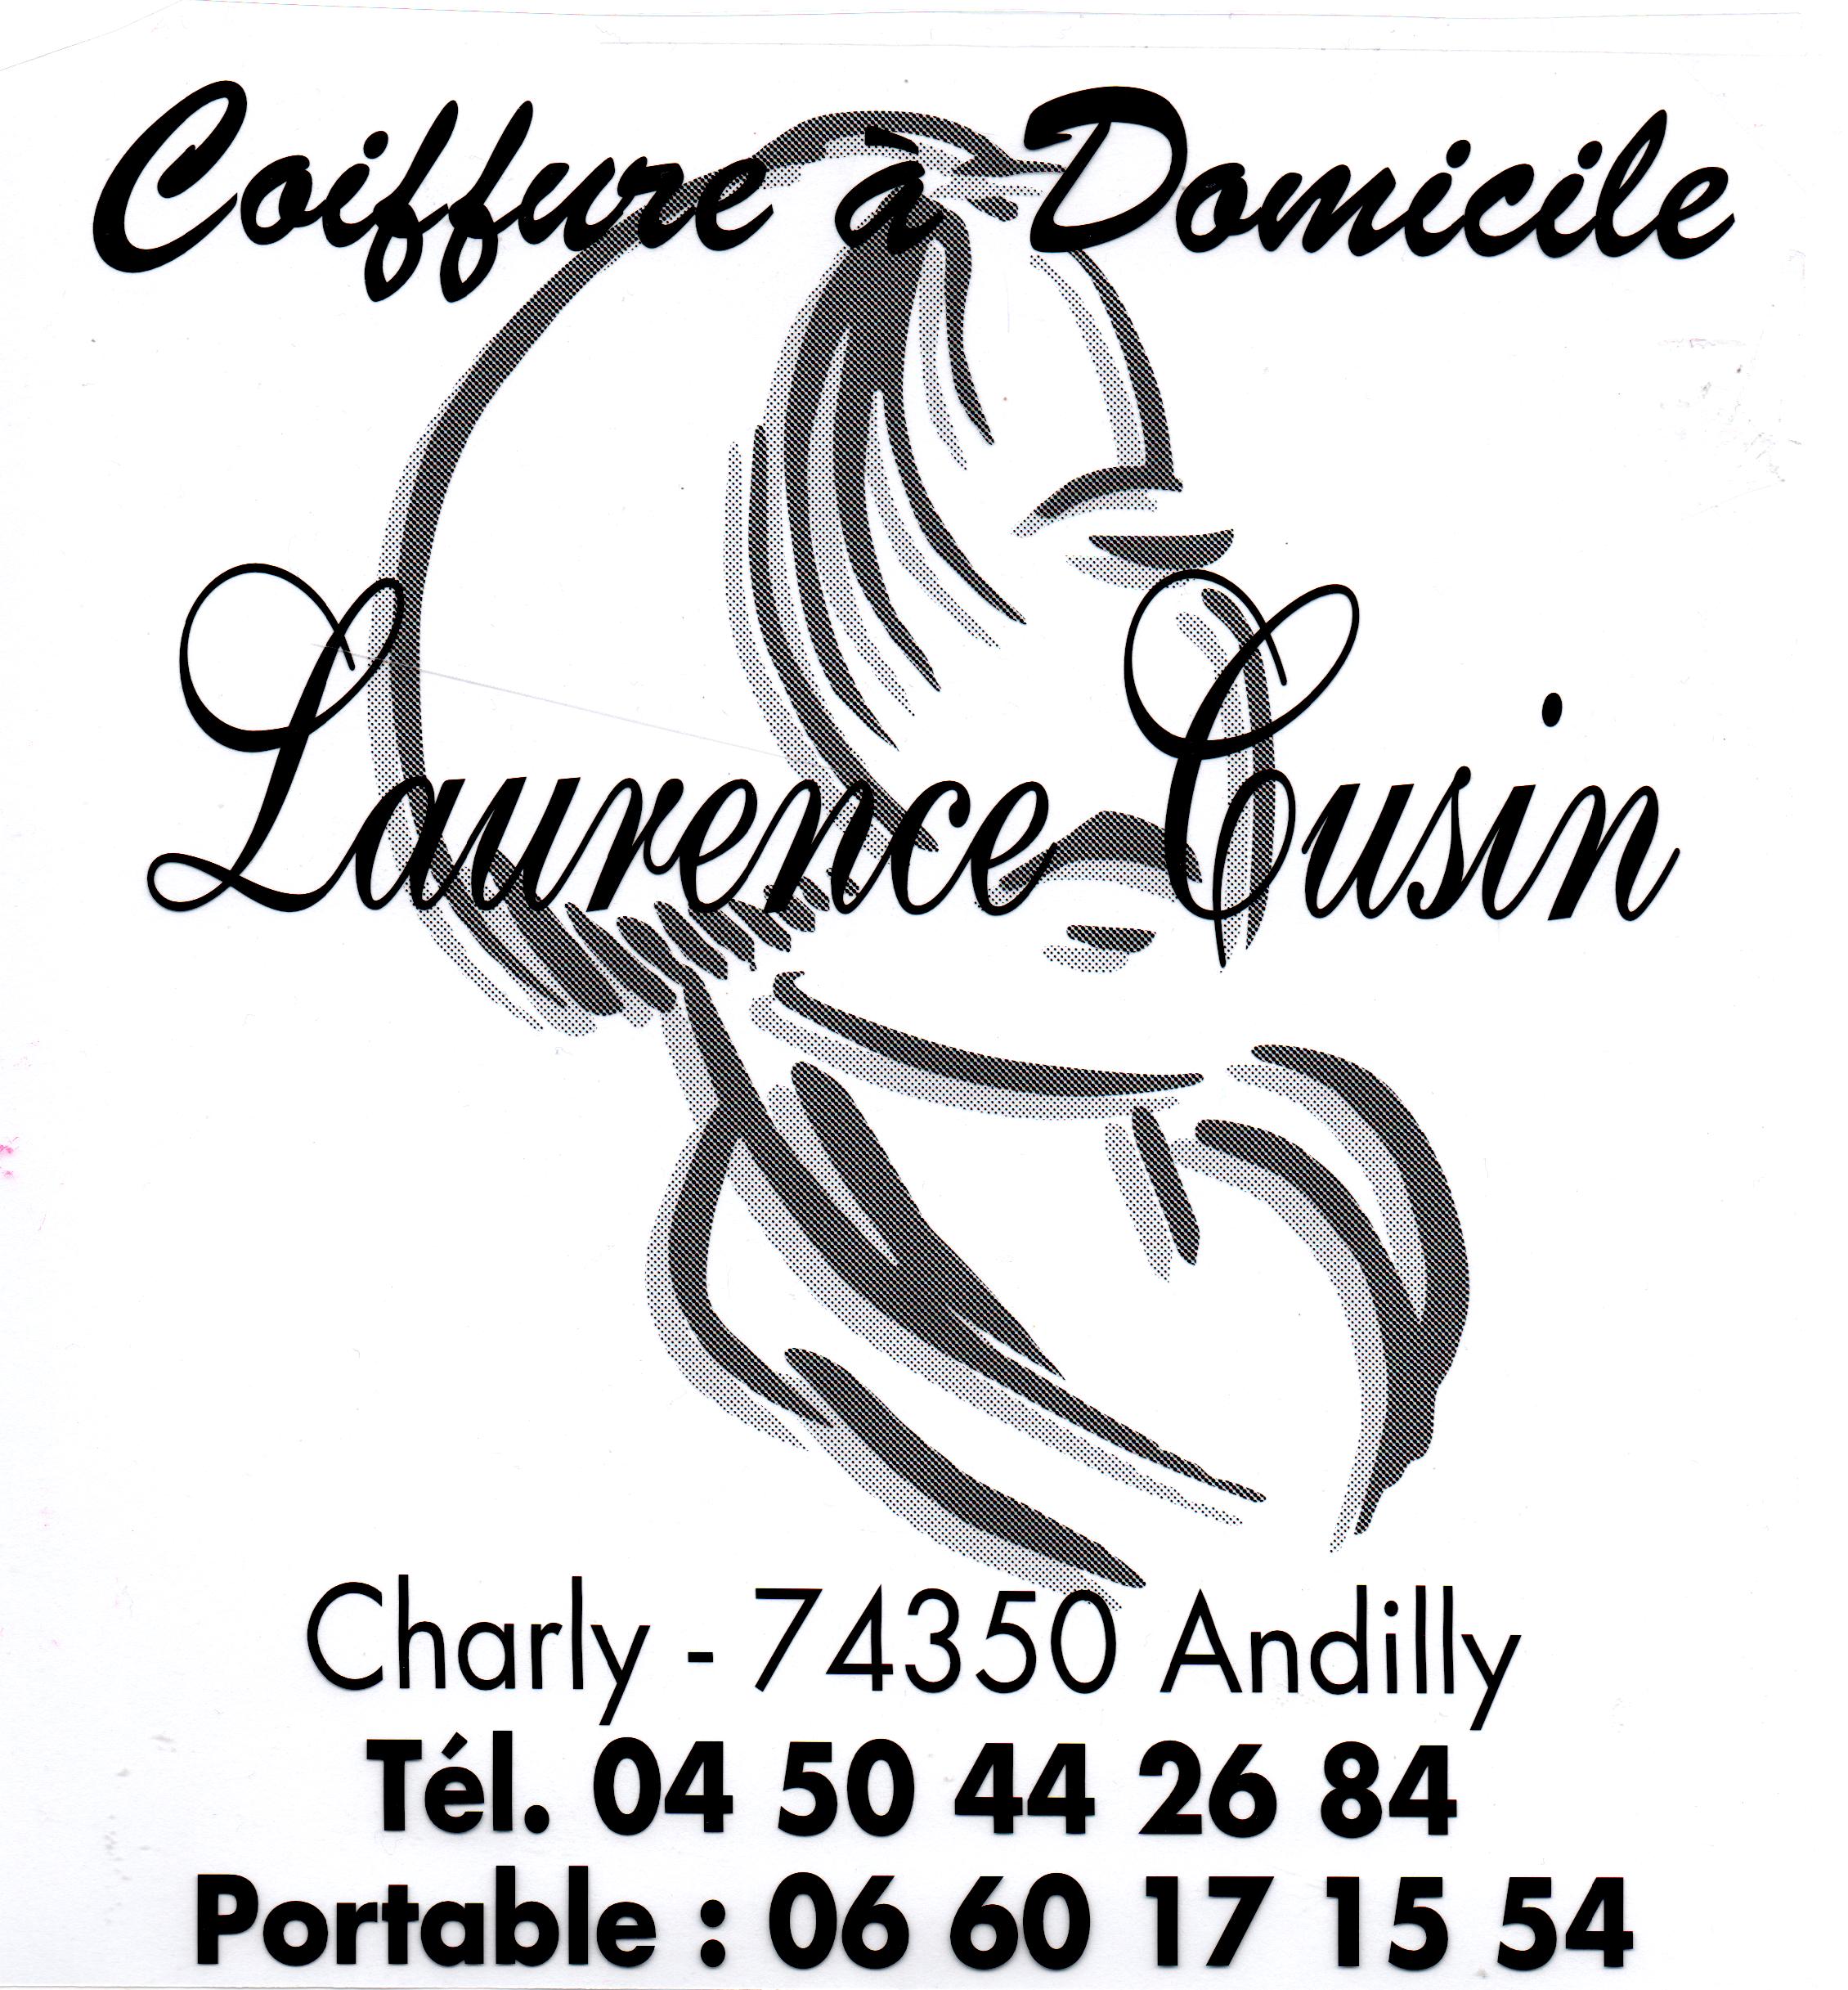 Coiffure  domicile charly 74350 Andilly Laurence Cusin